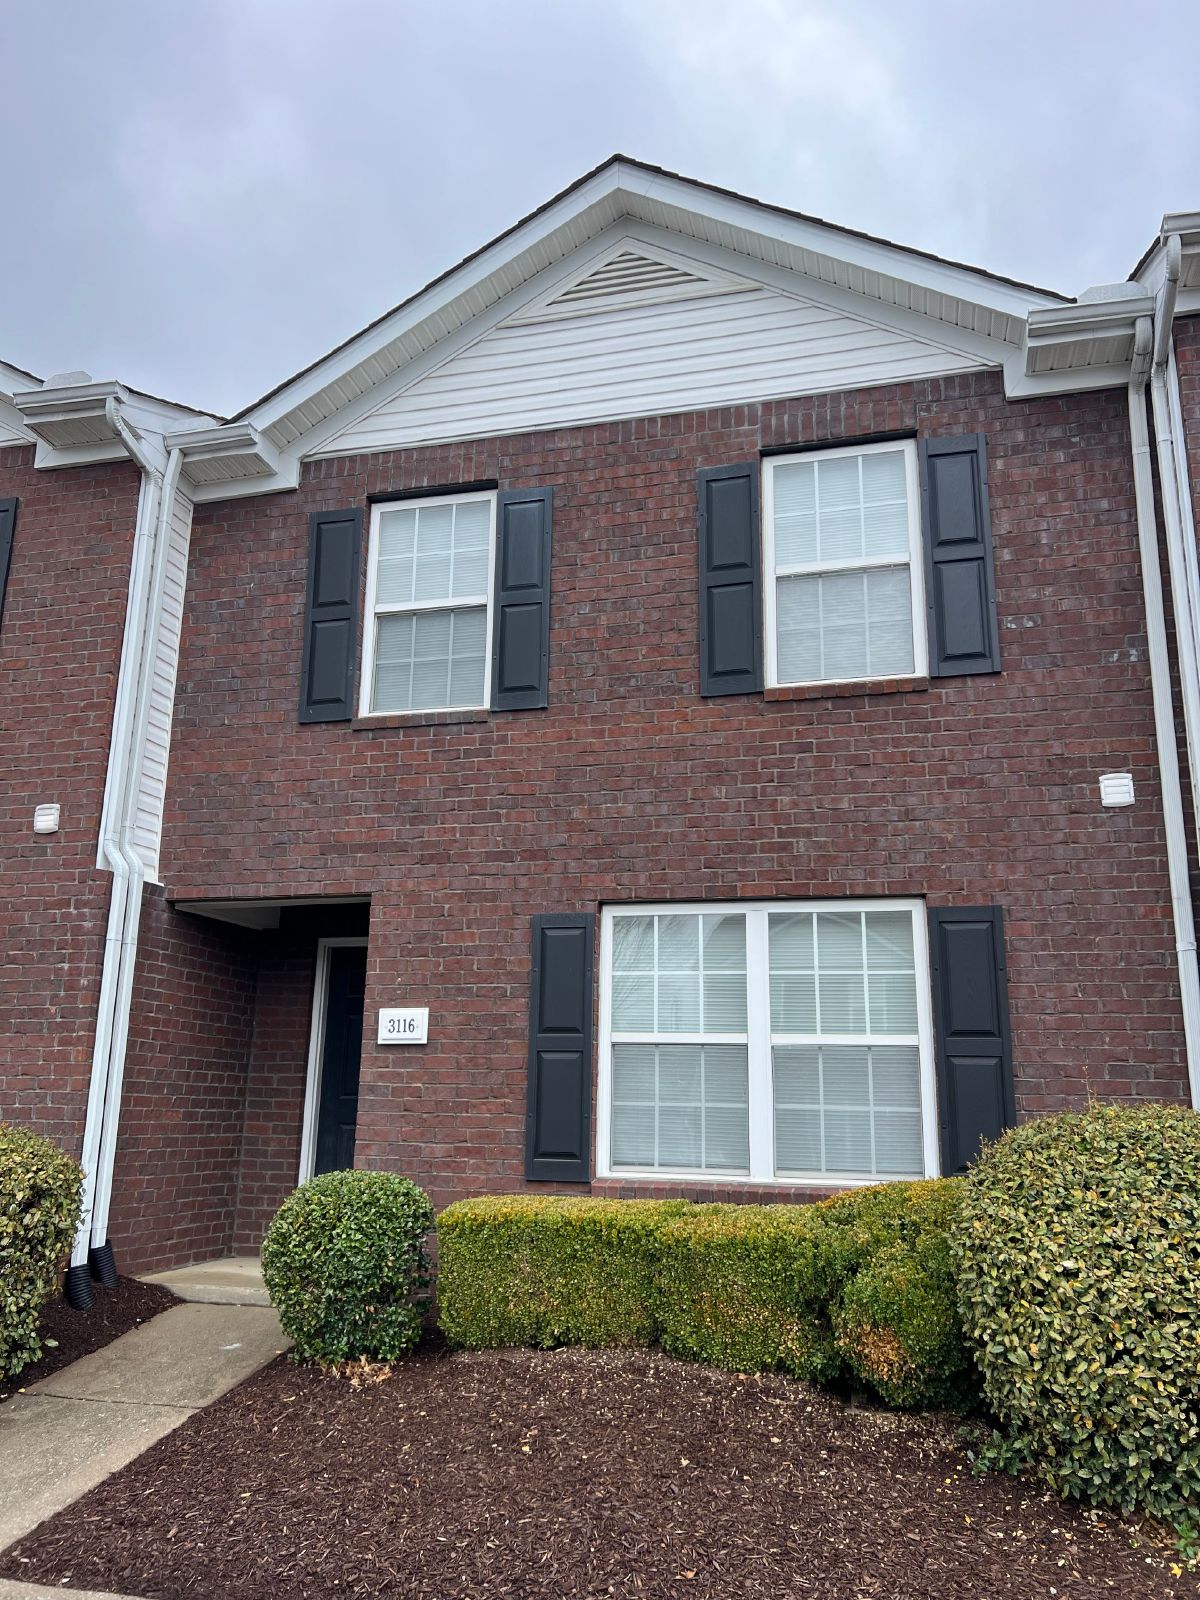 2 Bedroom 2.5 Bath Townhome in Lavergne - Available Now property image